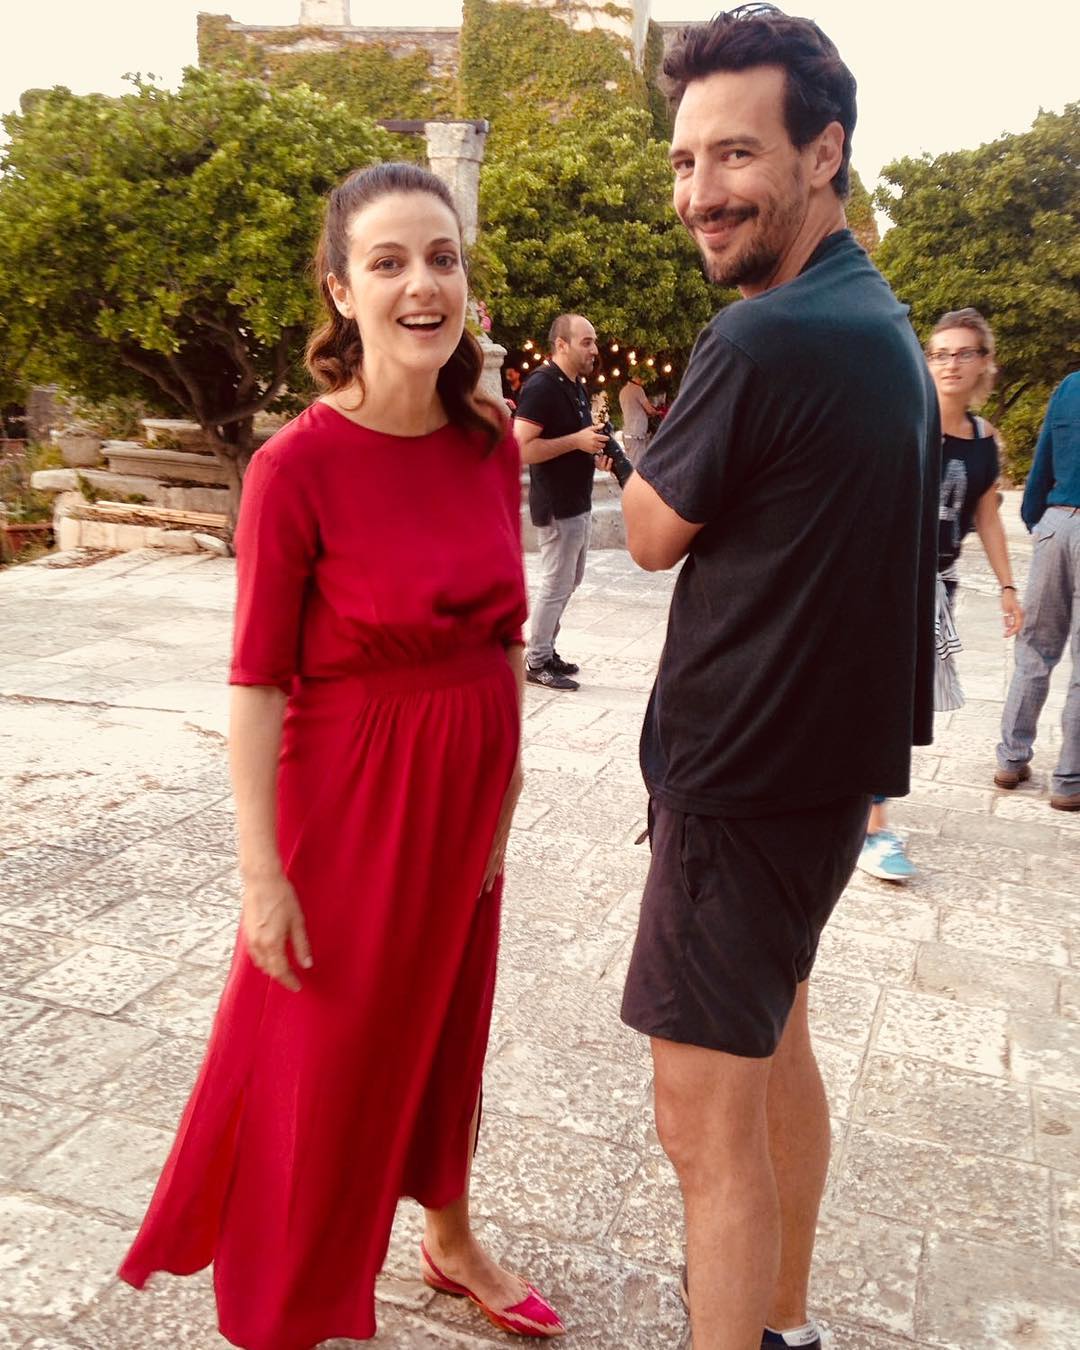 Barbara Ronchi and her husband Alessandro Tedeschi, as pictured in June 2018.